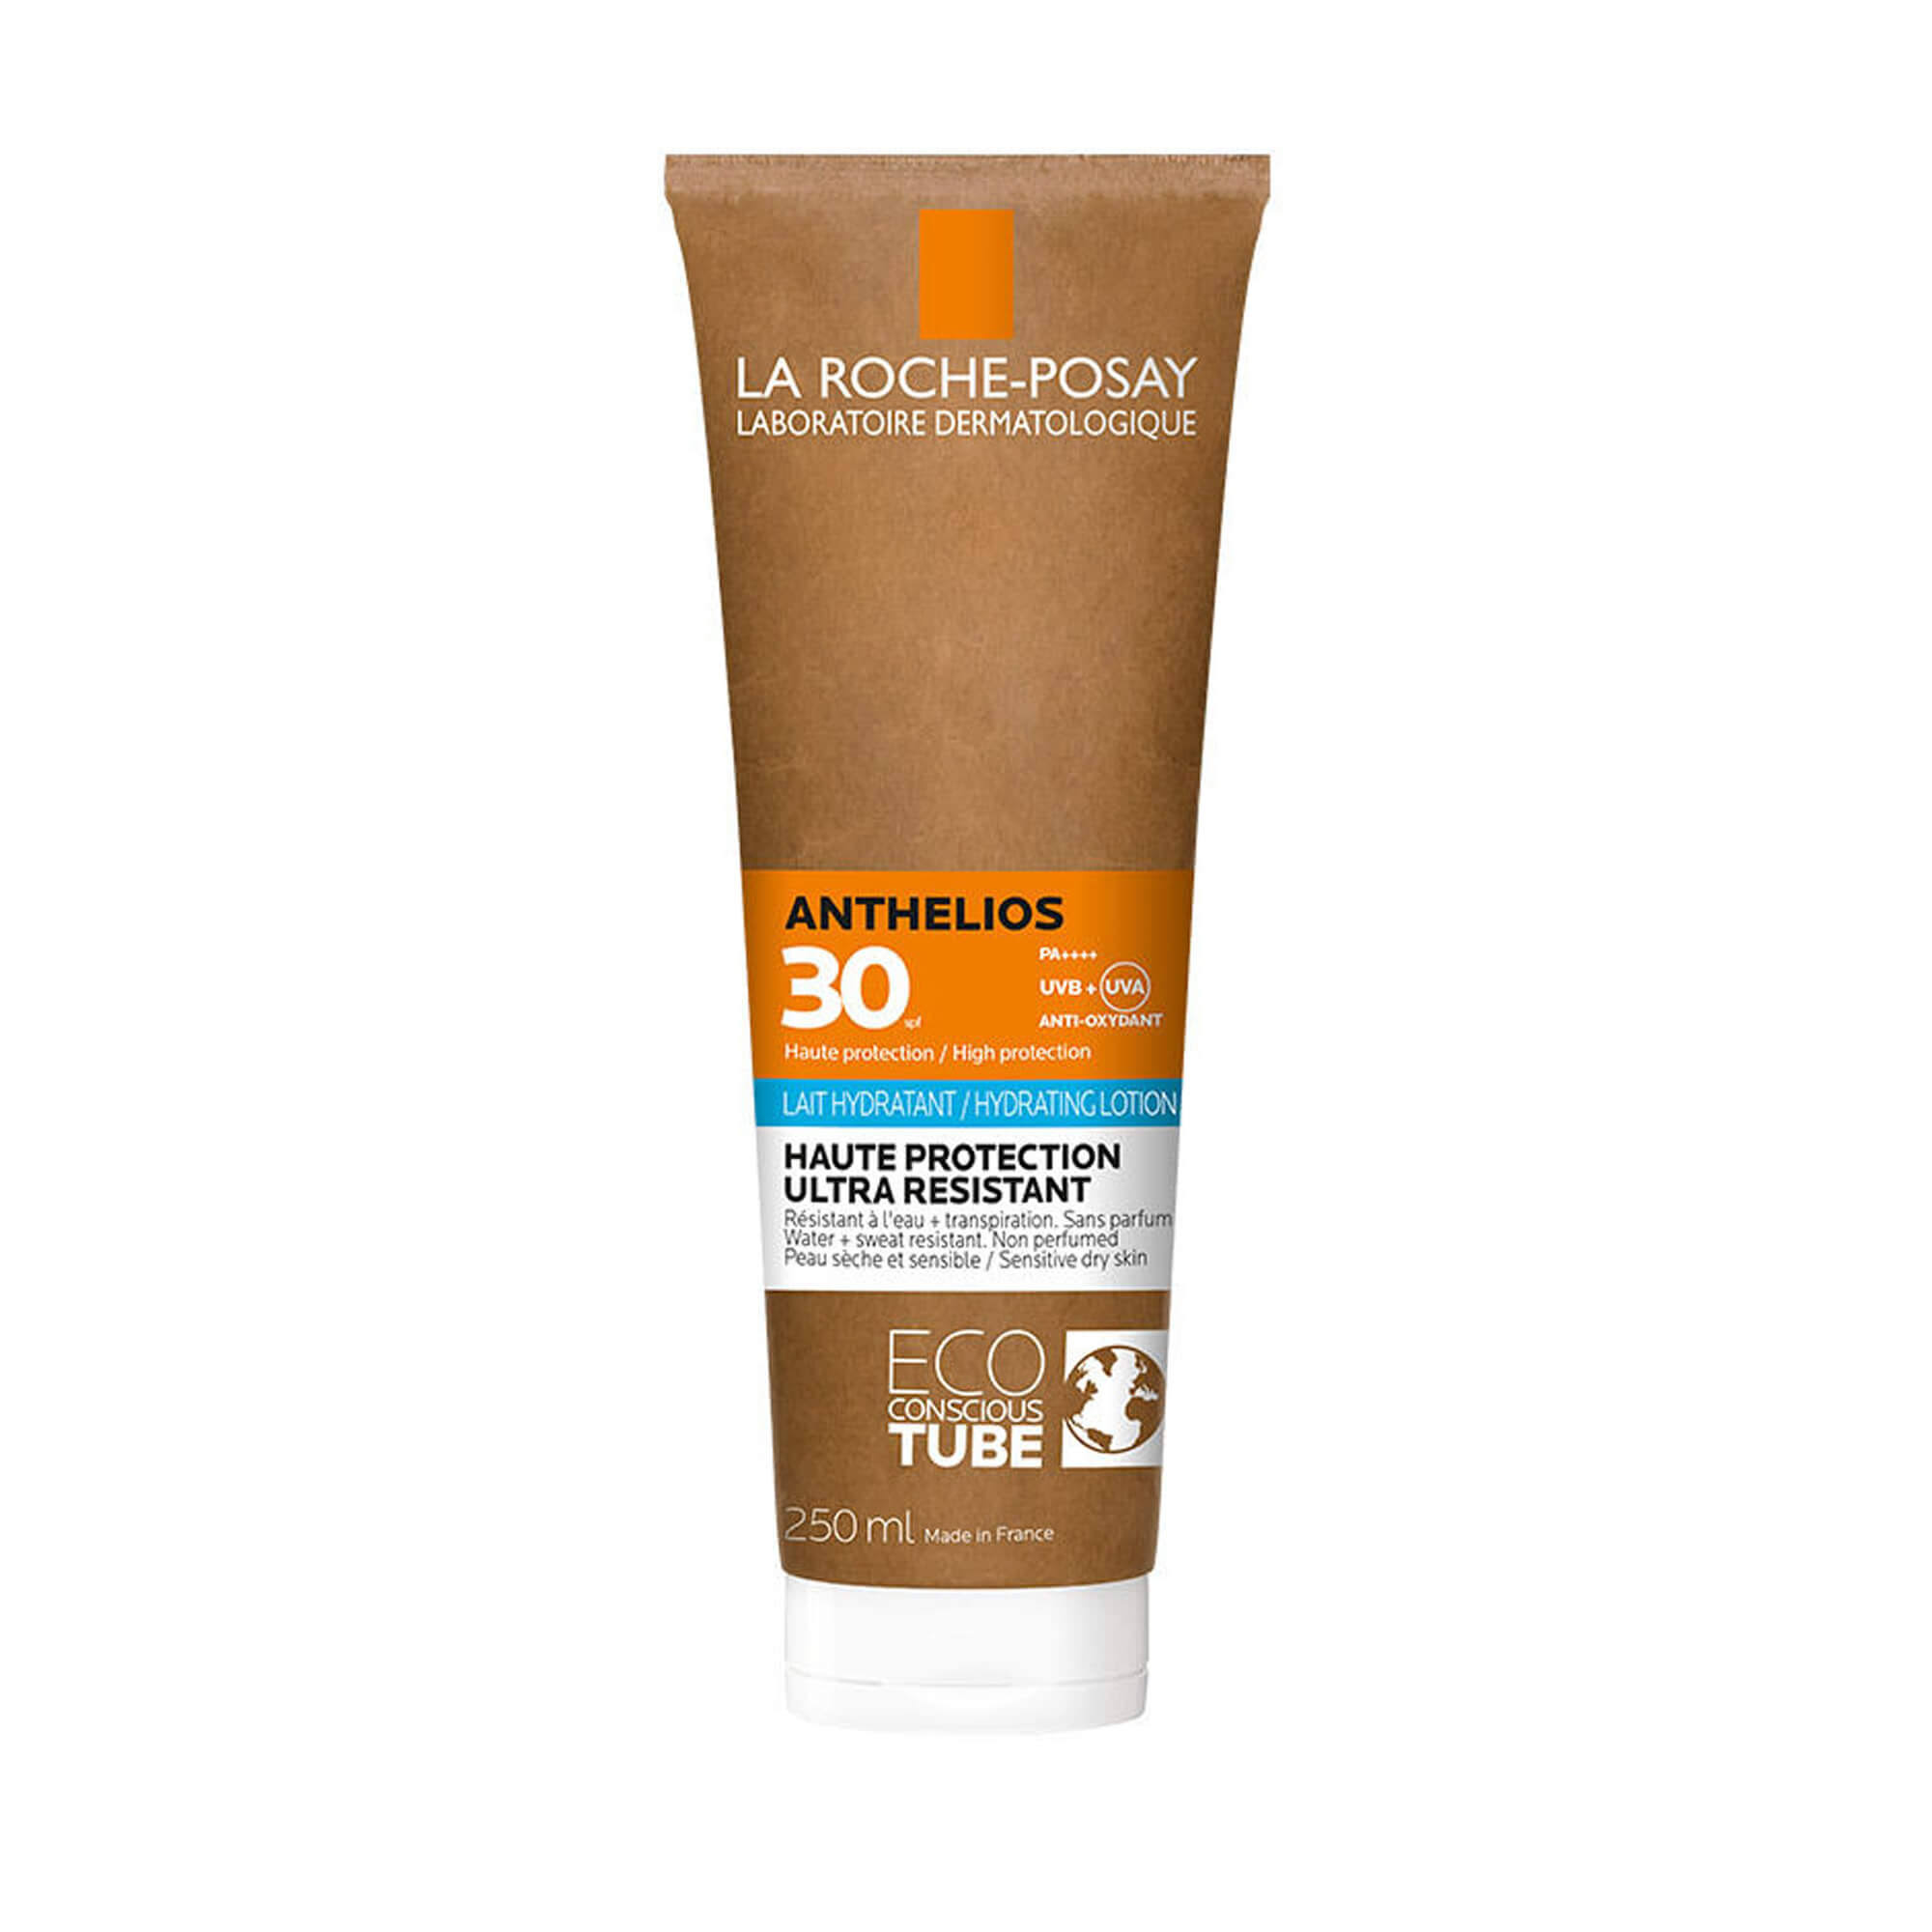 La Roche Posay Anthelios Hydrating Lotion SPF30